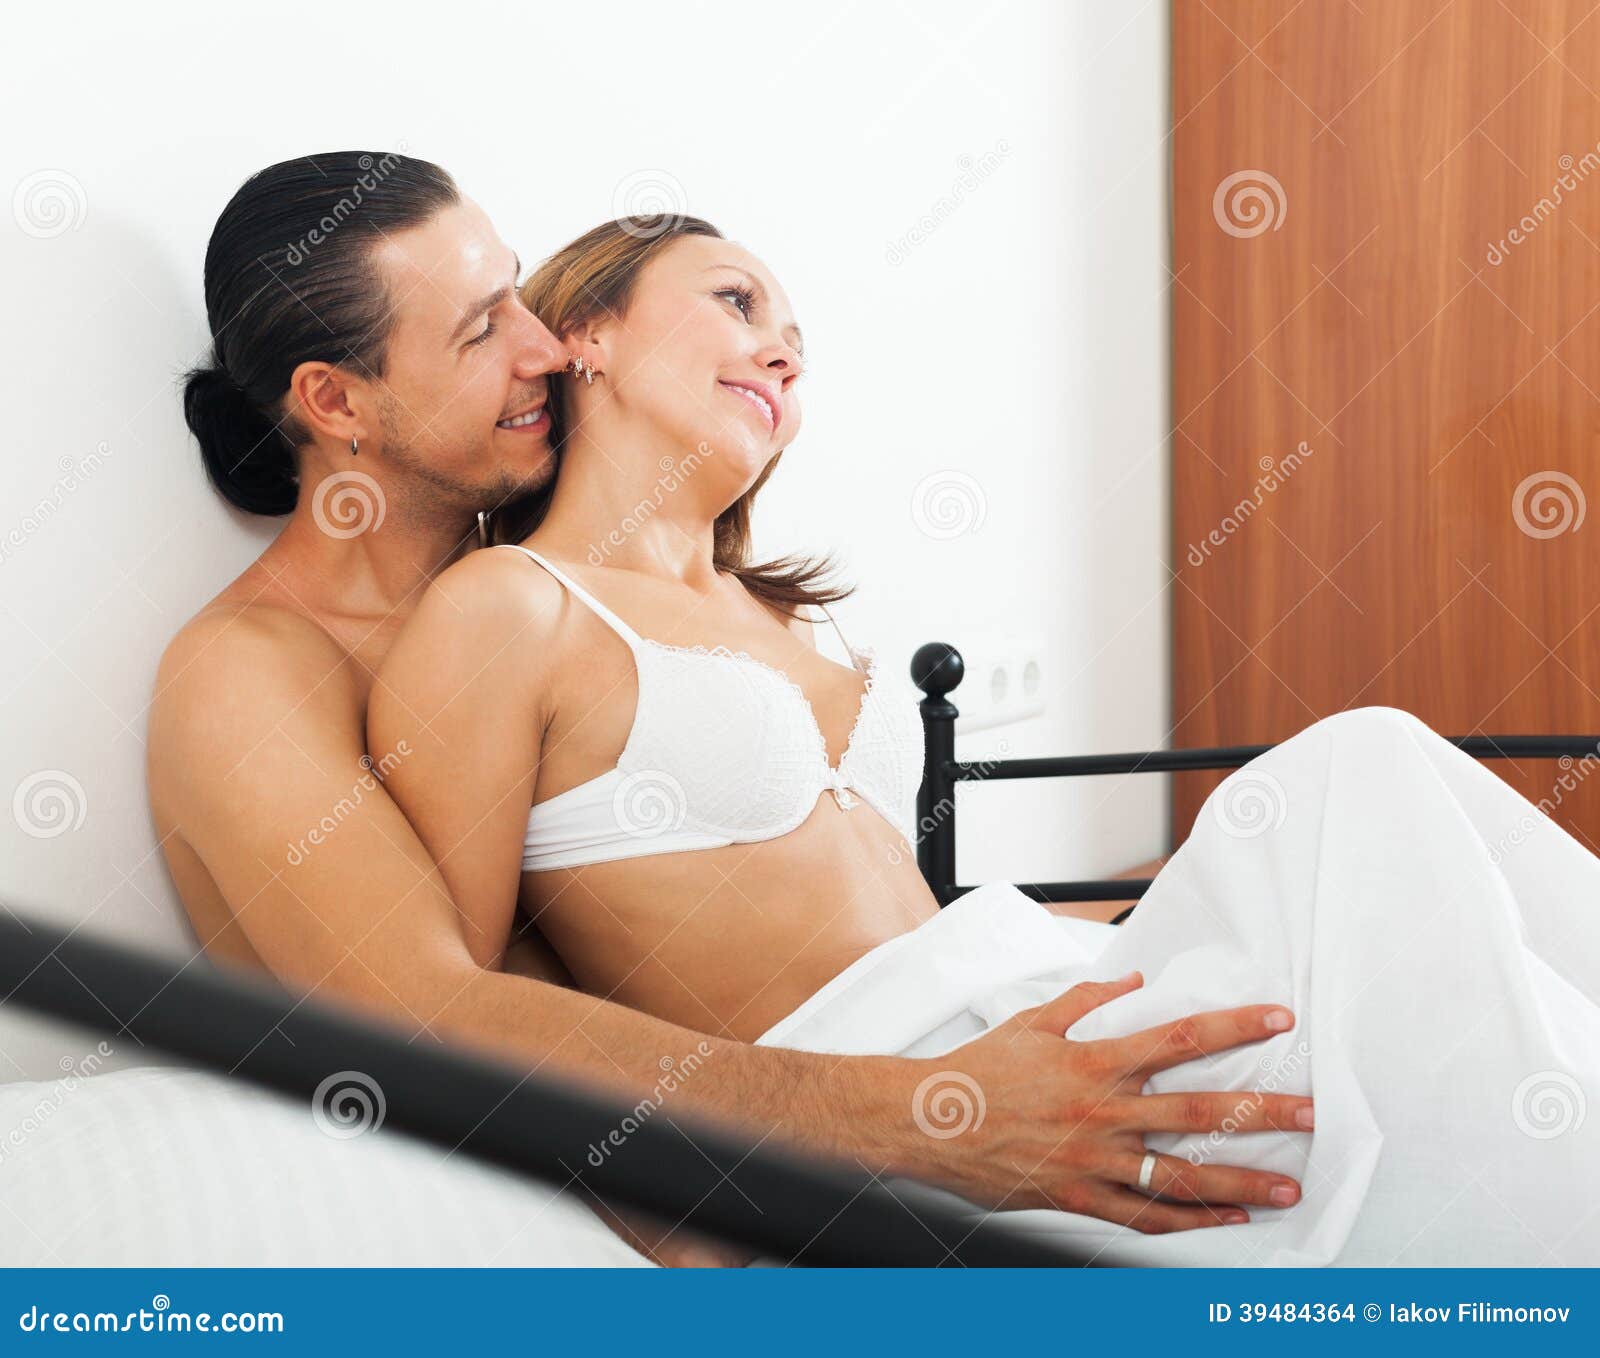 Middle Aged Lovers In Bed Stock Photo Image 39484364